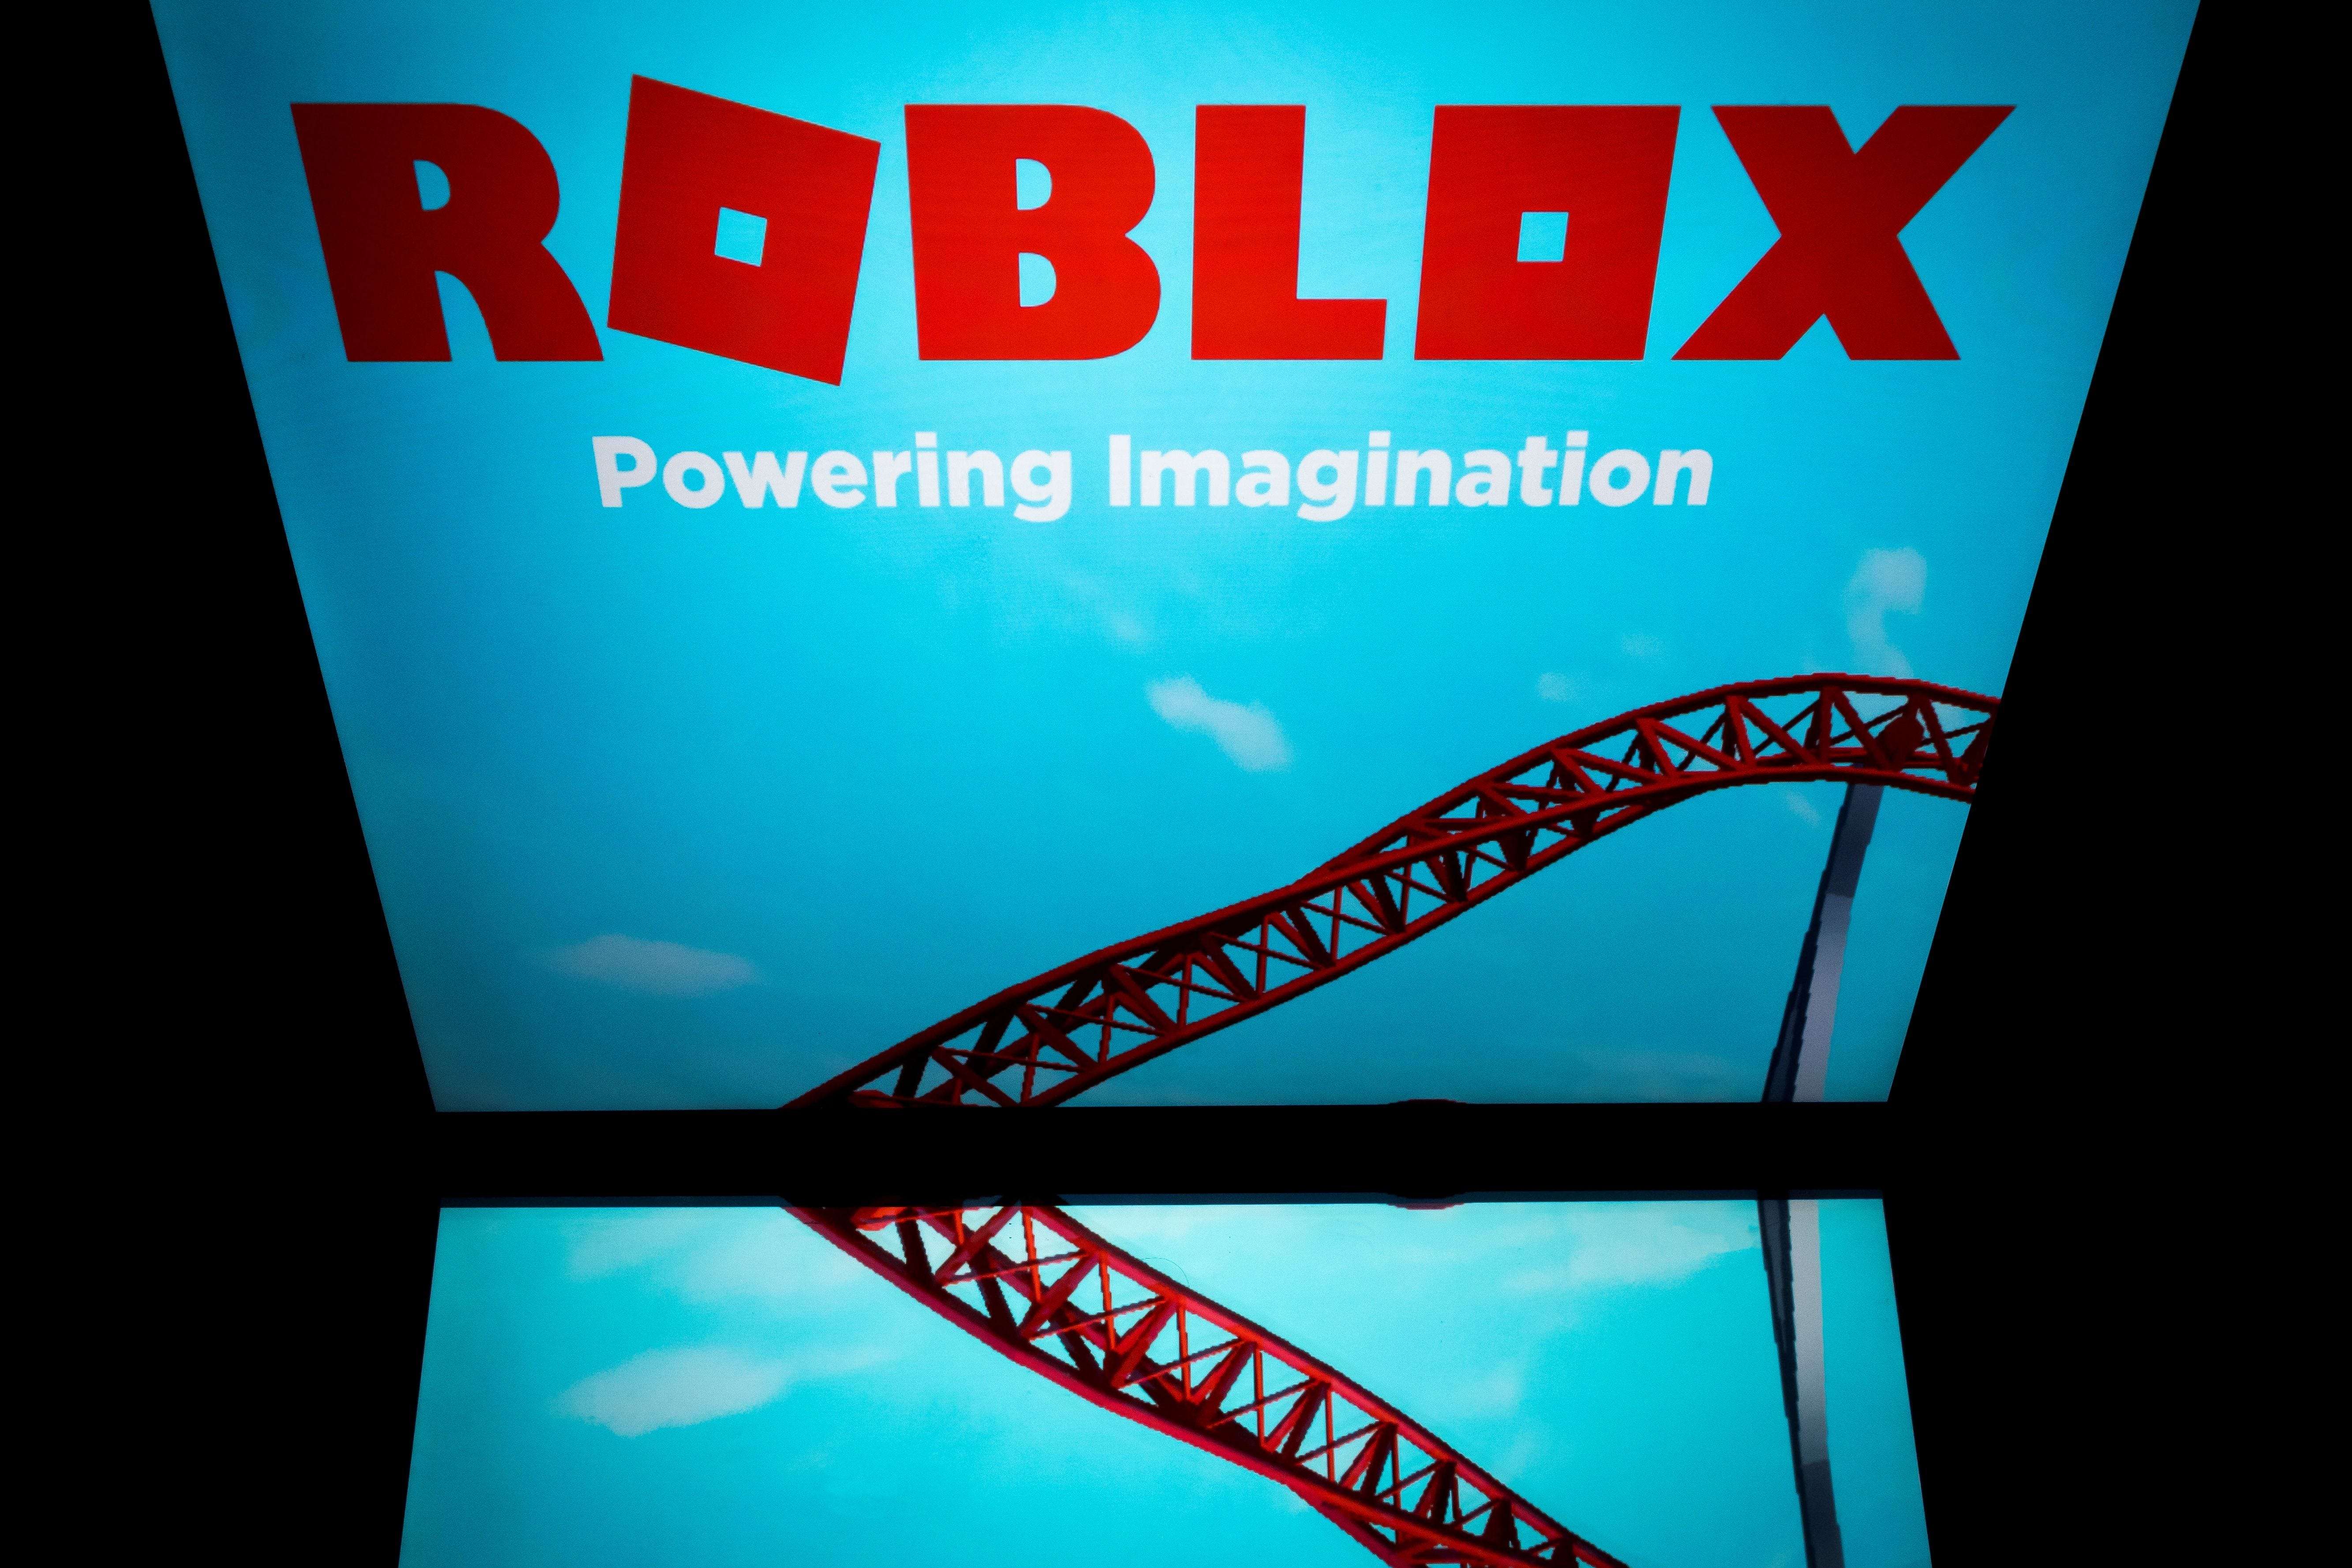 Roblox wants to shed its reputation as a kids-only platform - Protocol